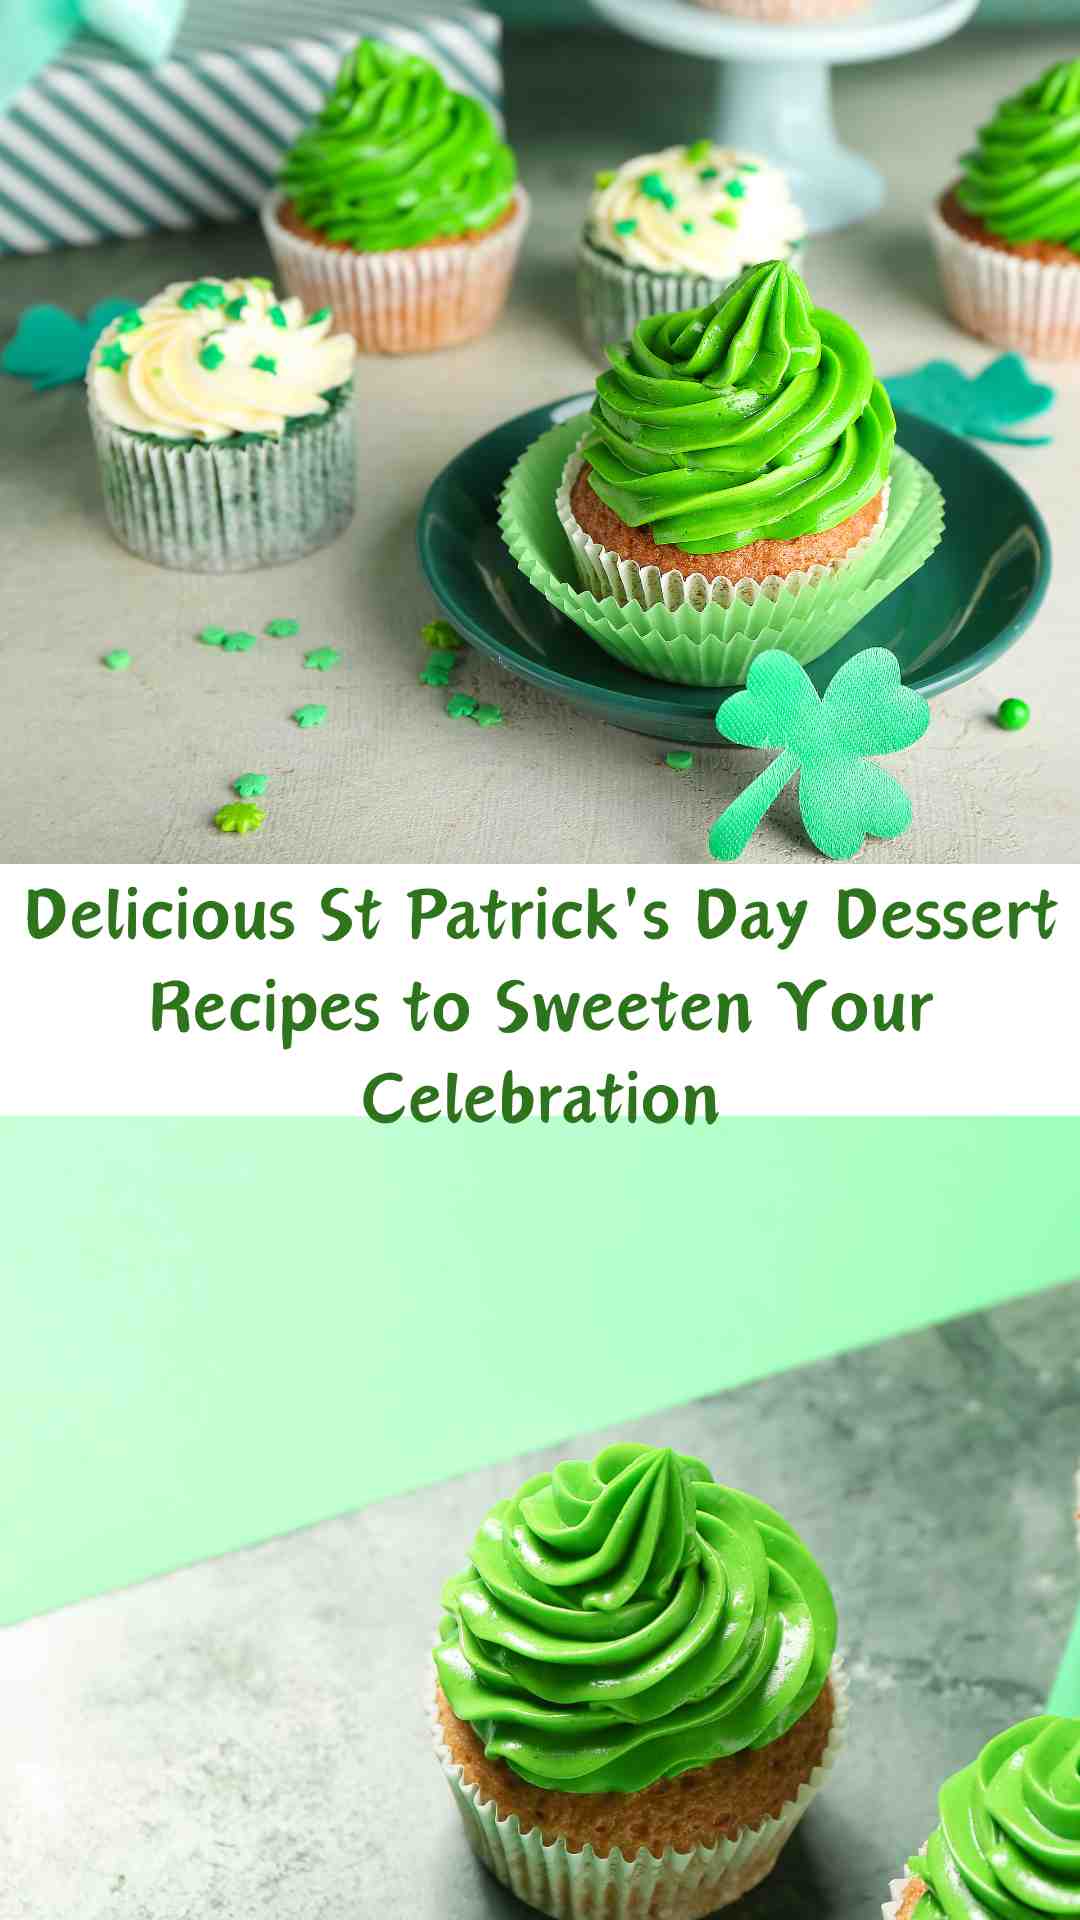 Delicious St Patrick's Day Dessert Recipes to Sweeten Your Celebration